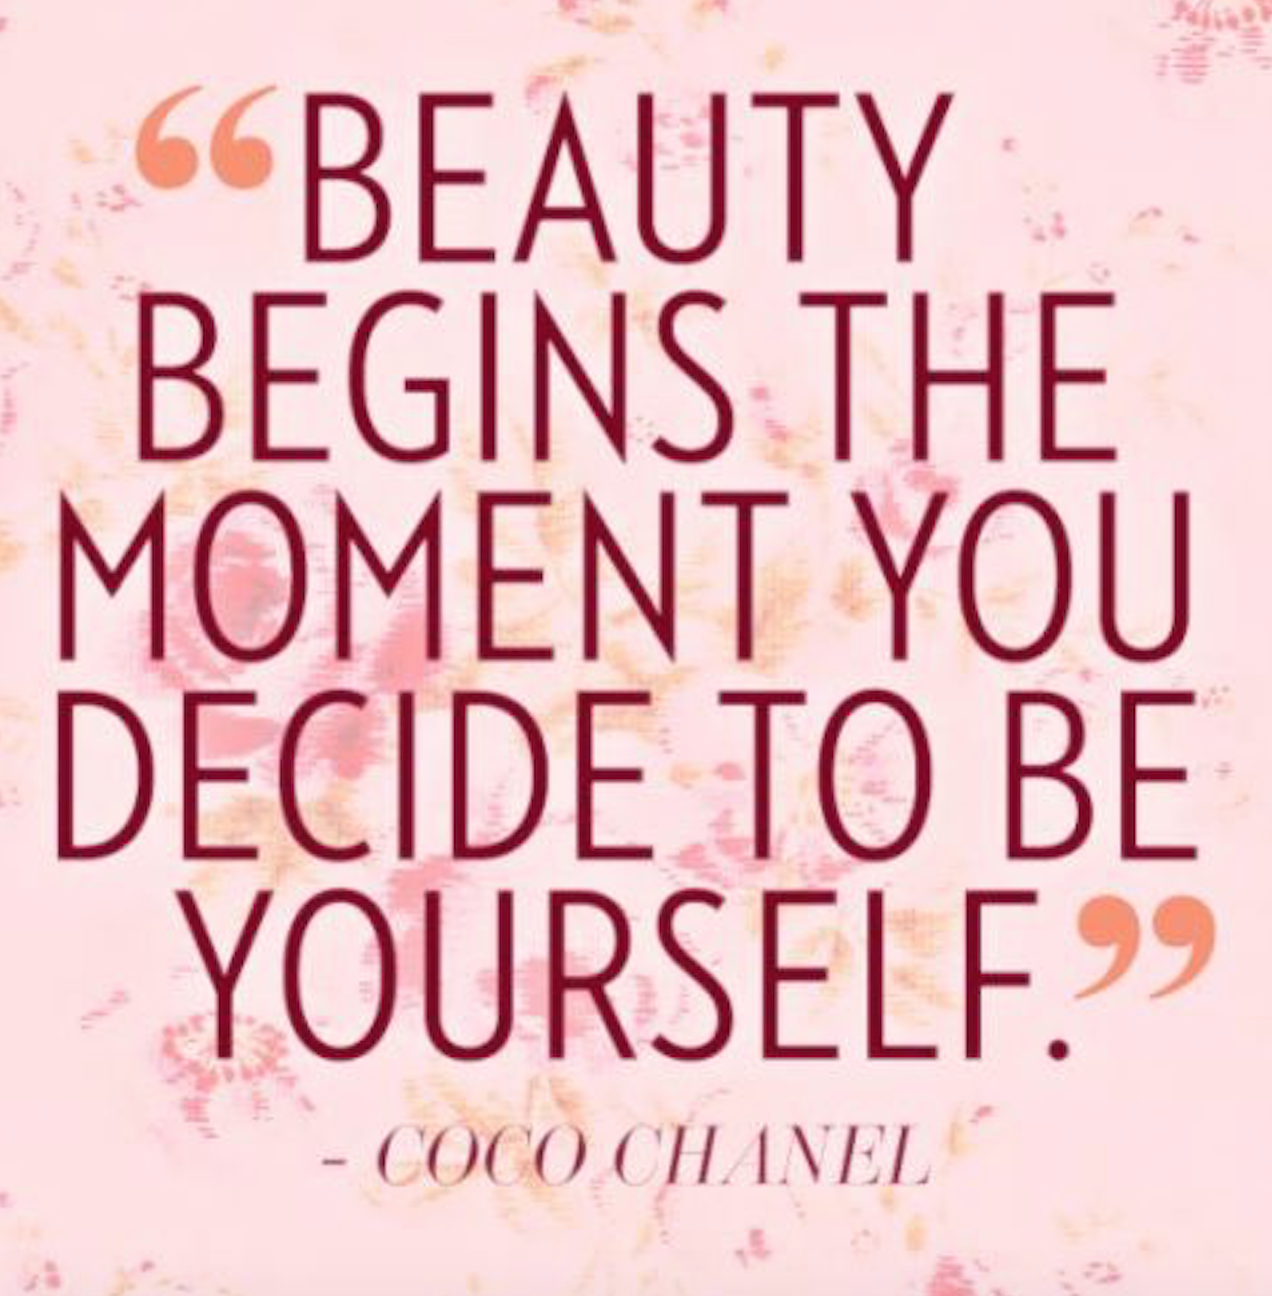 beauty begins the moment you decide to be yourself. coco chanel